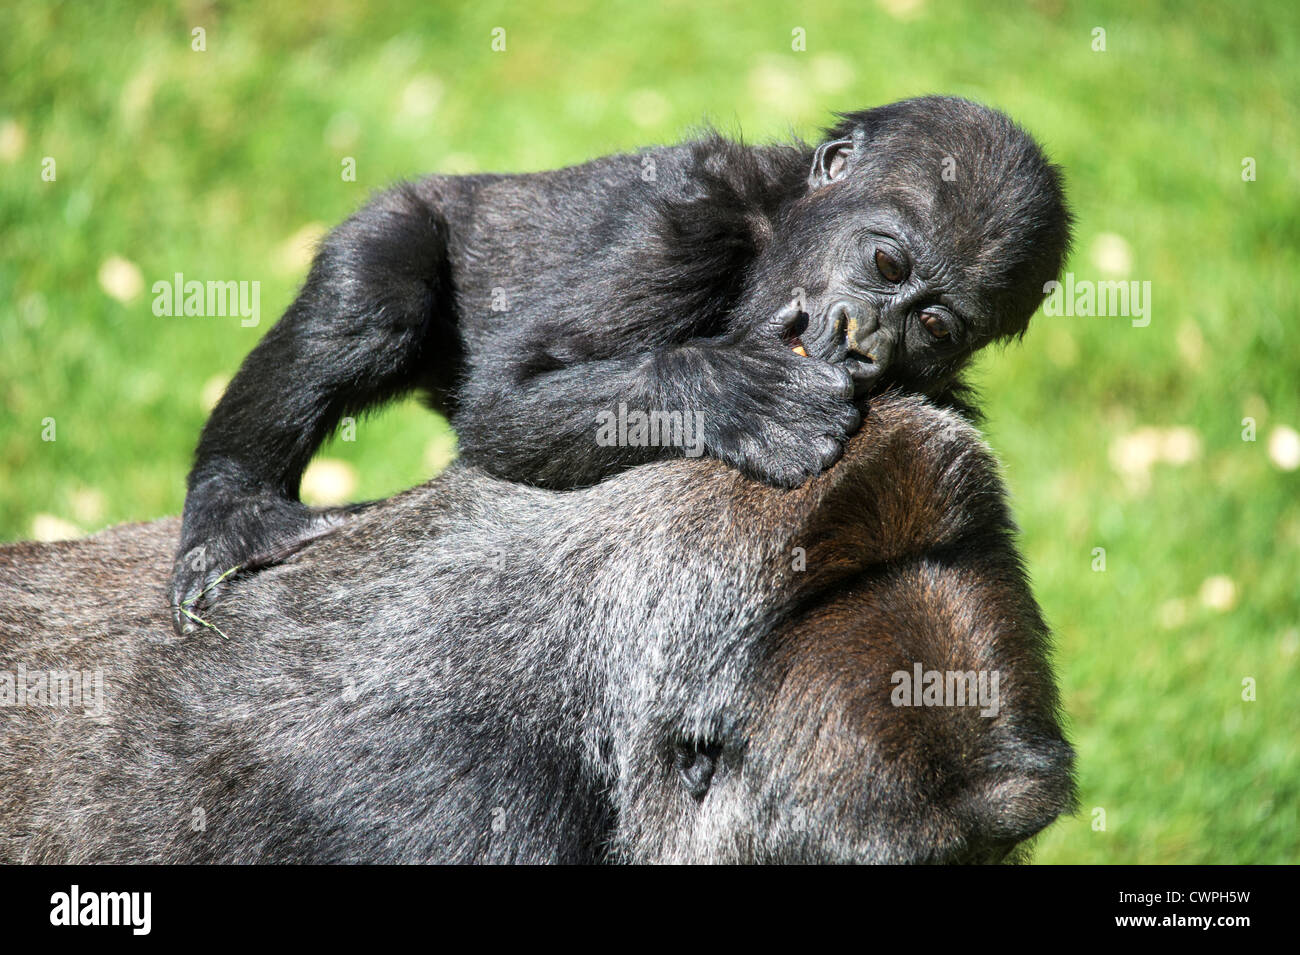 https://c8.alamy.com/comp/CWPH5W/baby-gorilla-riding-on-his-mothers-back-CWPH5W.jpg